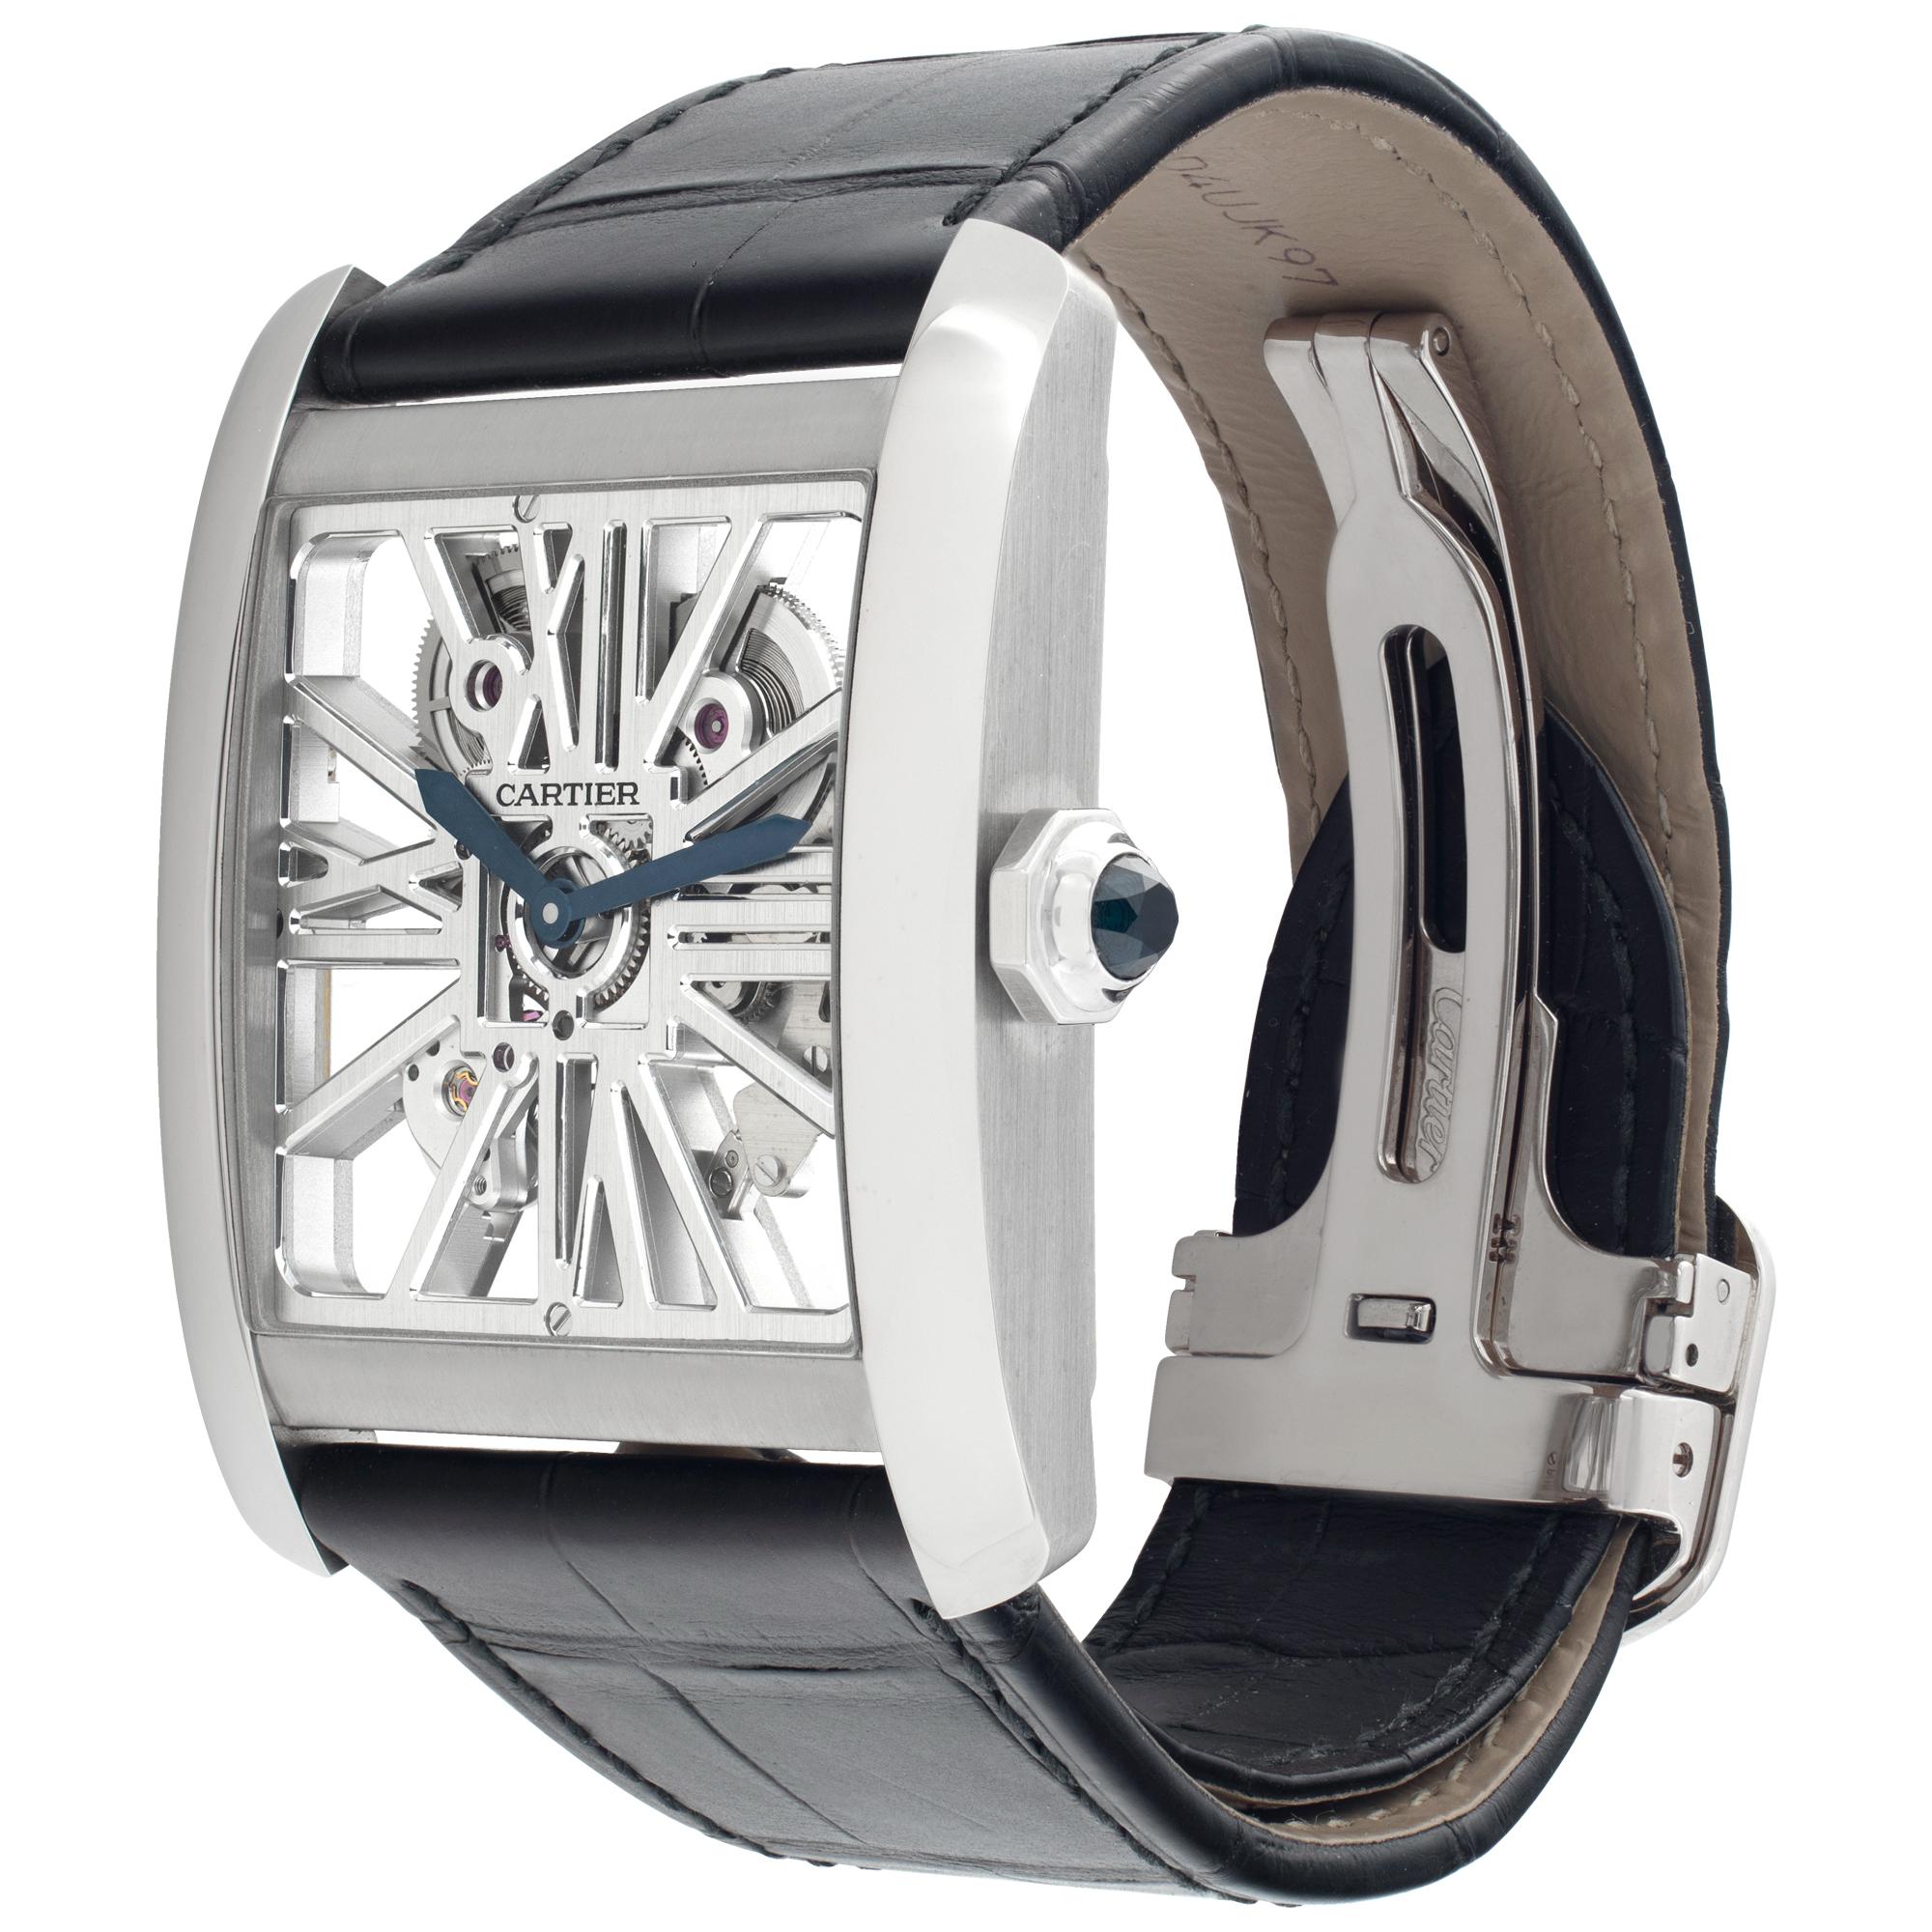 New old stock. Cartier Tank MC Skeleton Large Palladium watch on leather strap with Cartier 18k white gold deployant buckle. A rare platinum class metal 2 times more expensive then platinum. 20 jewels. Manual. 34 mm case size. Unused with box, tag